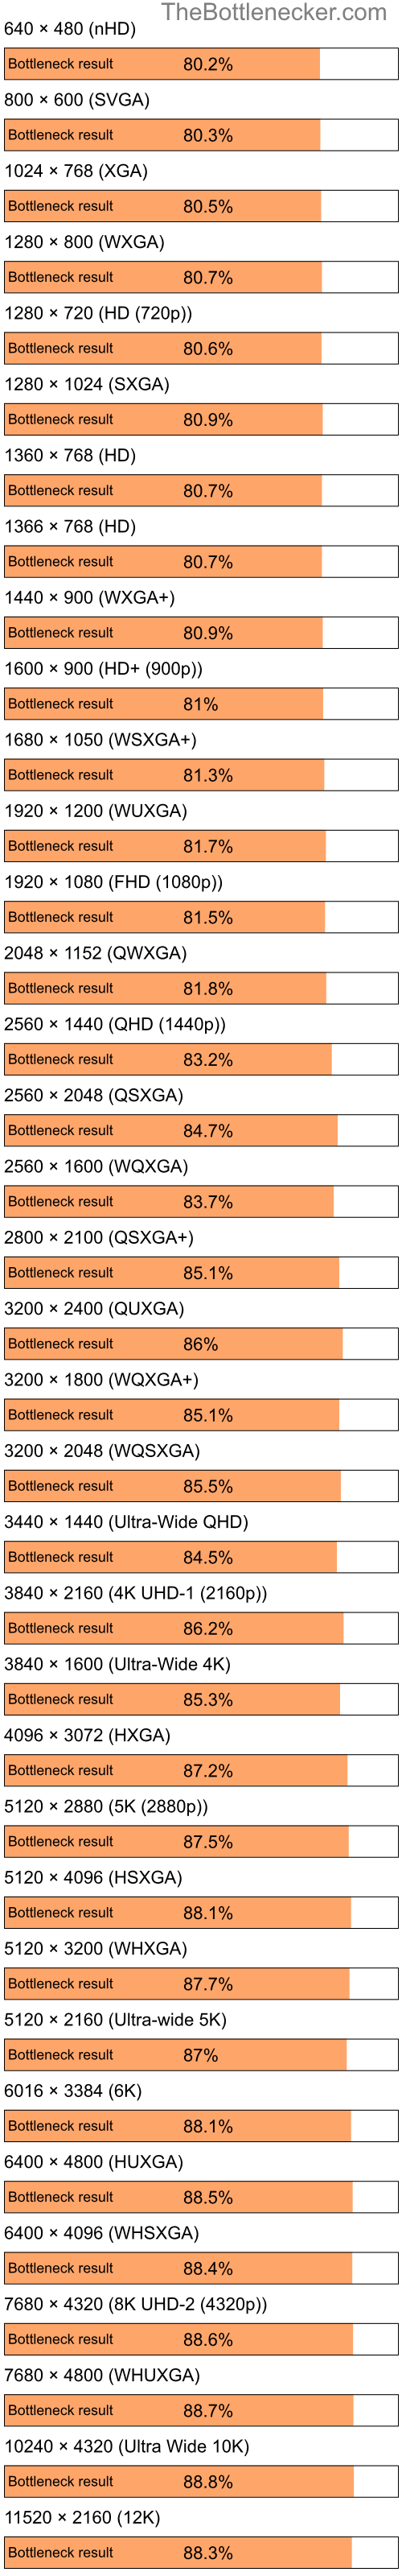 Bottleneck results by resolution for Intel Pentium 4 and NVIDIA nForce 630i in Graphic Card Intense Tasks